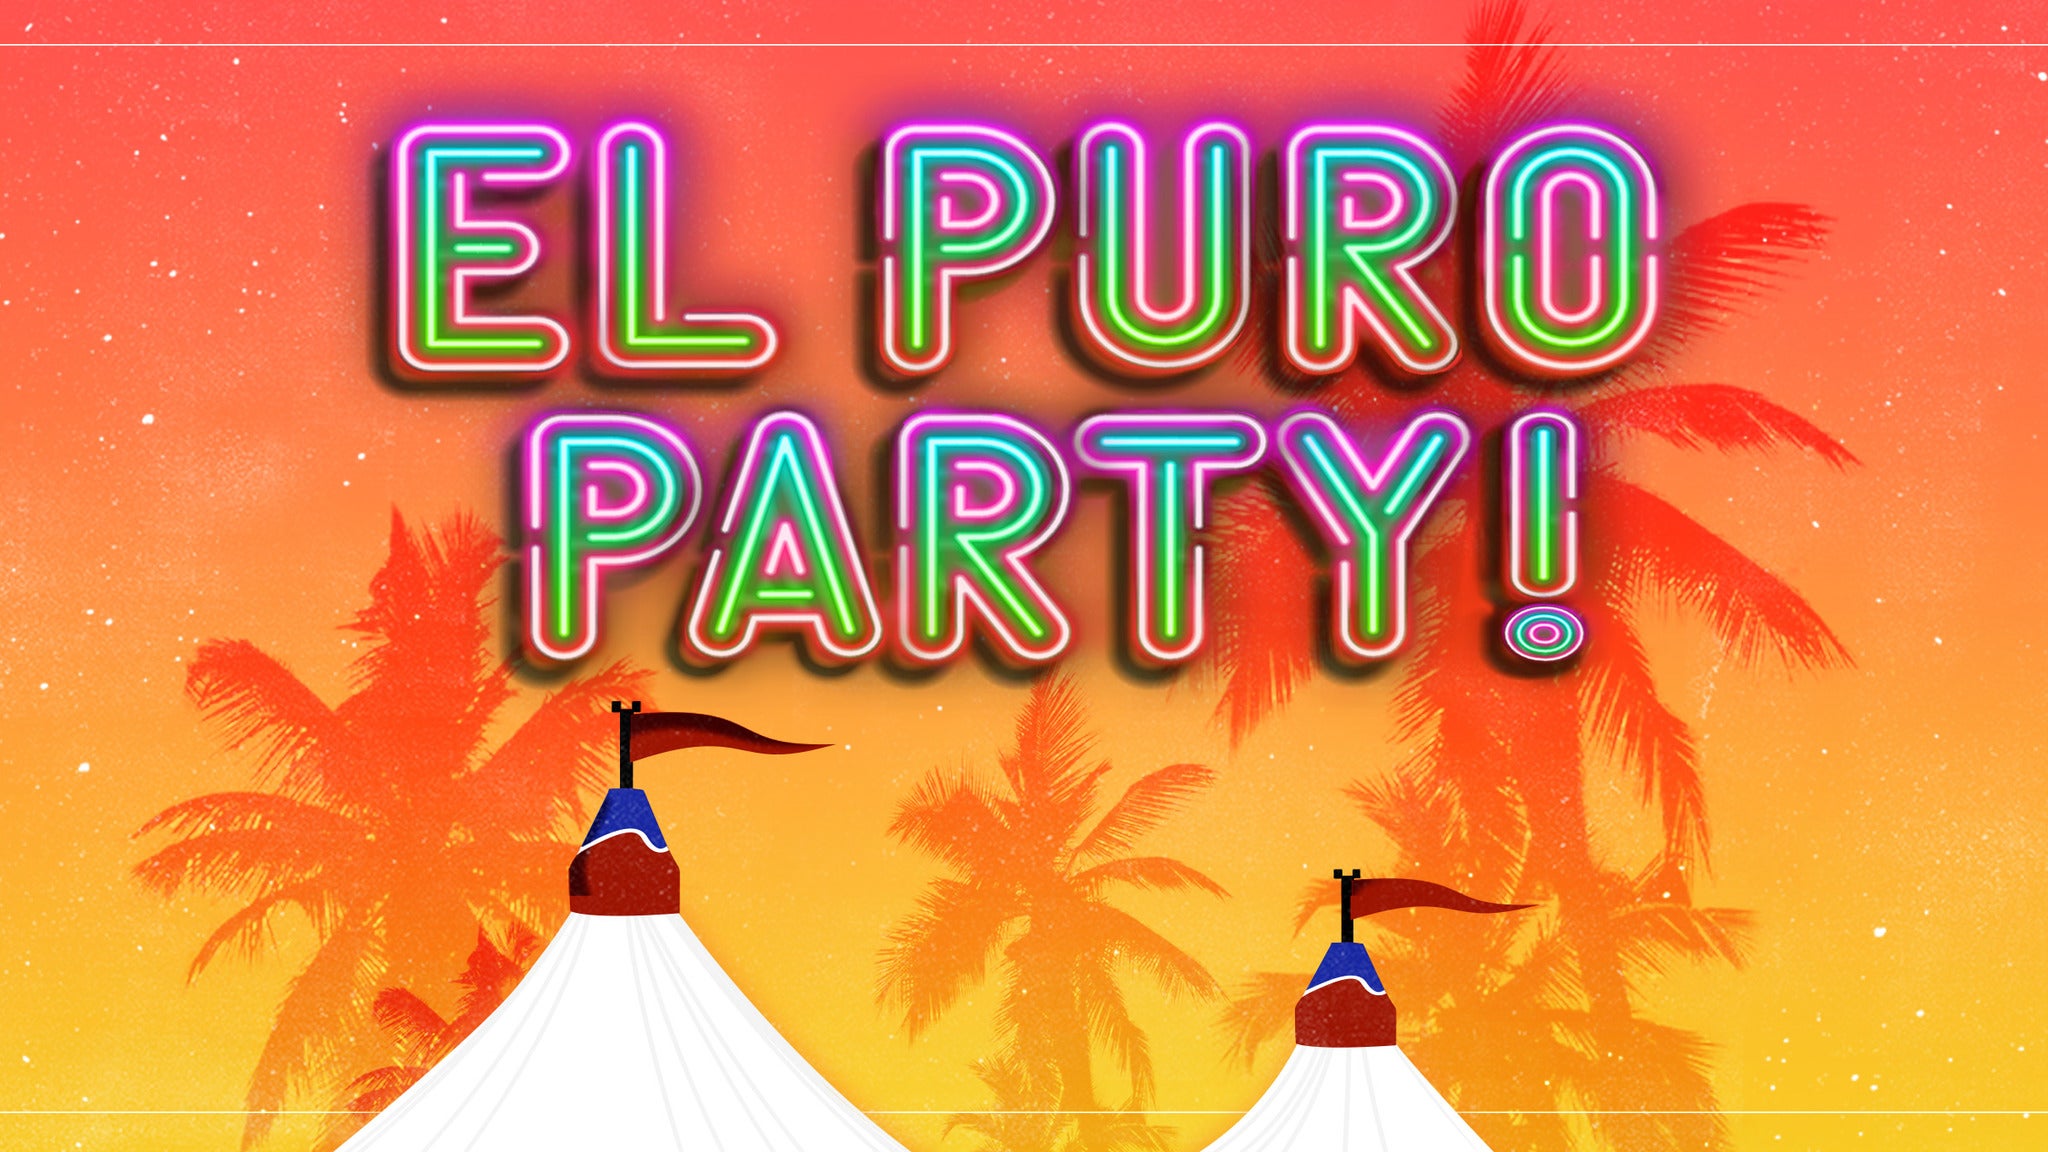 El Puro Party presale password for early tickets in Mountain View